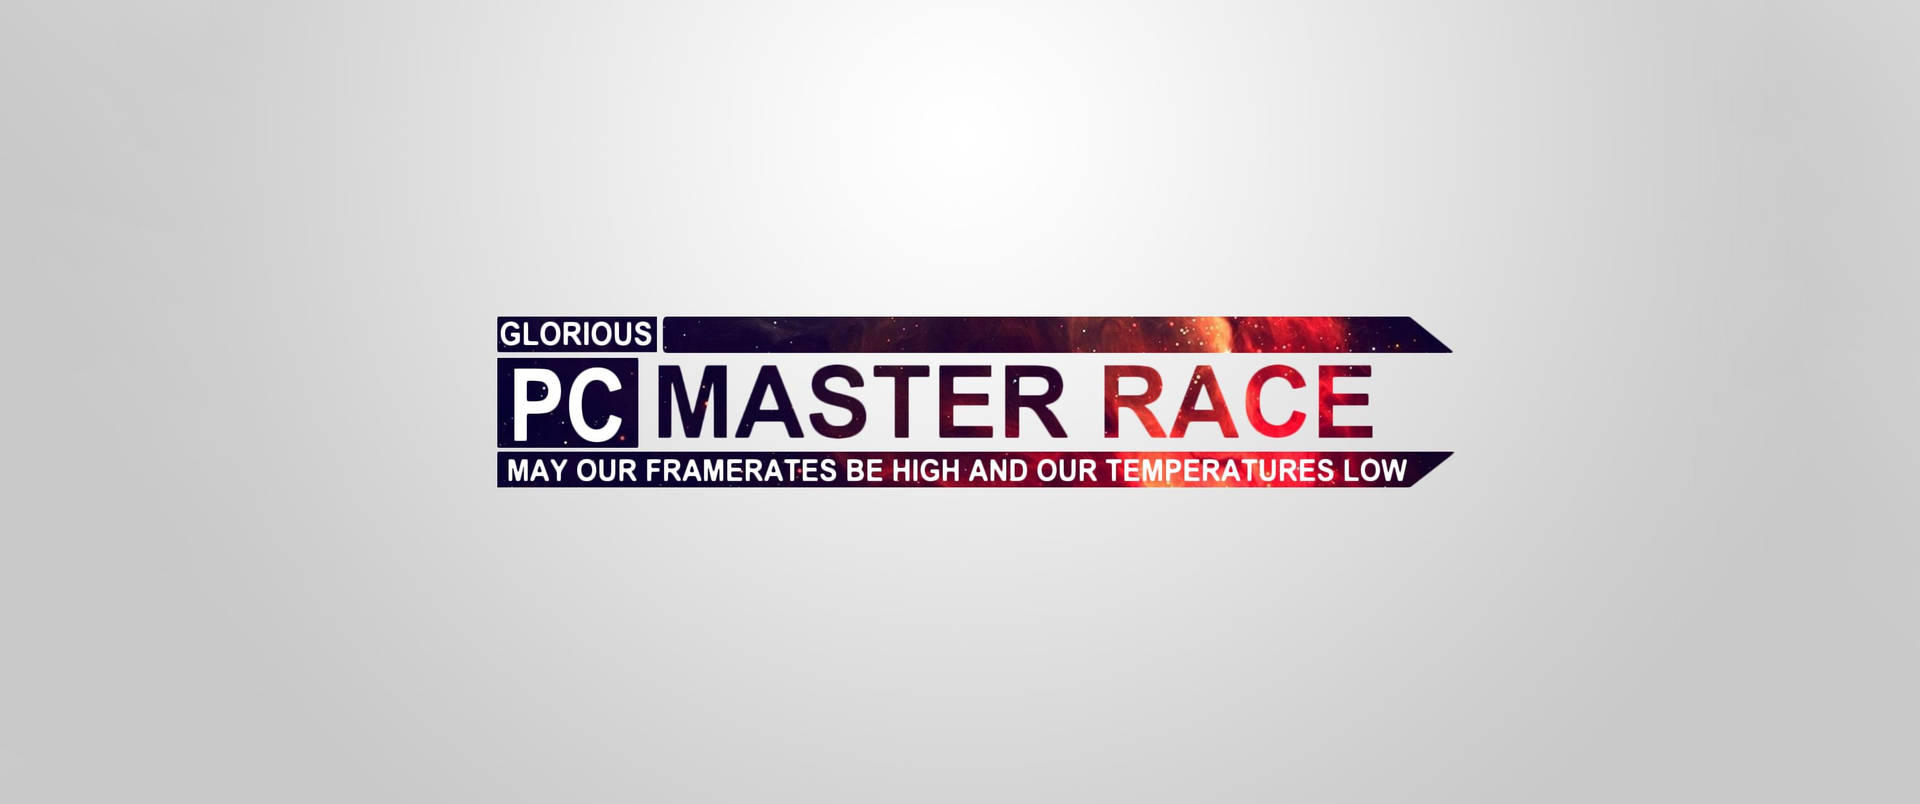 Pc Master Race Framerates And Temperature Wallpaper